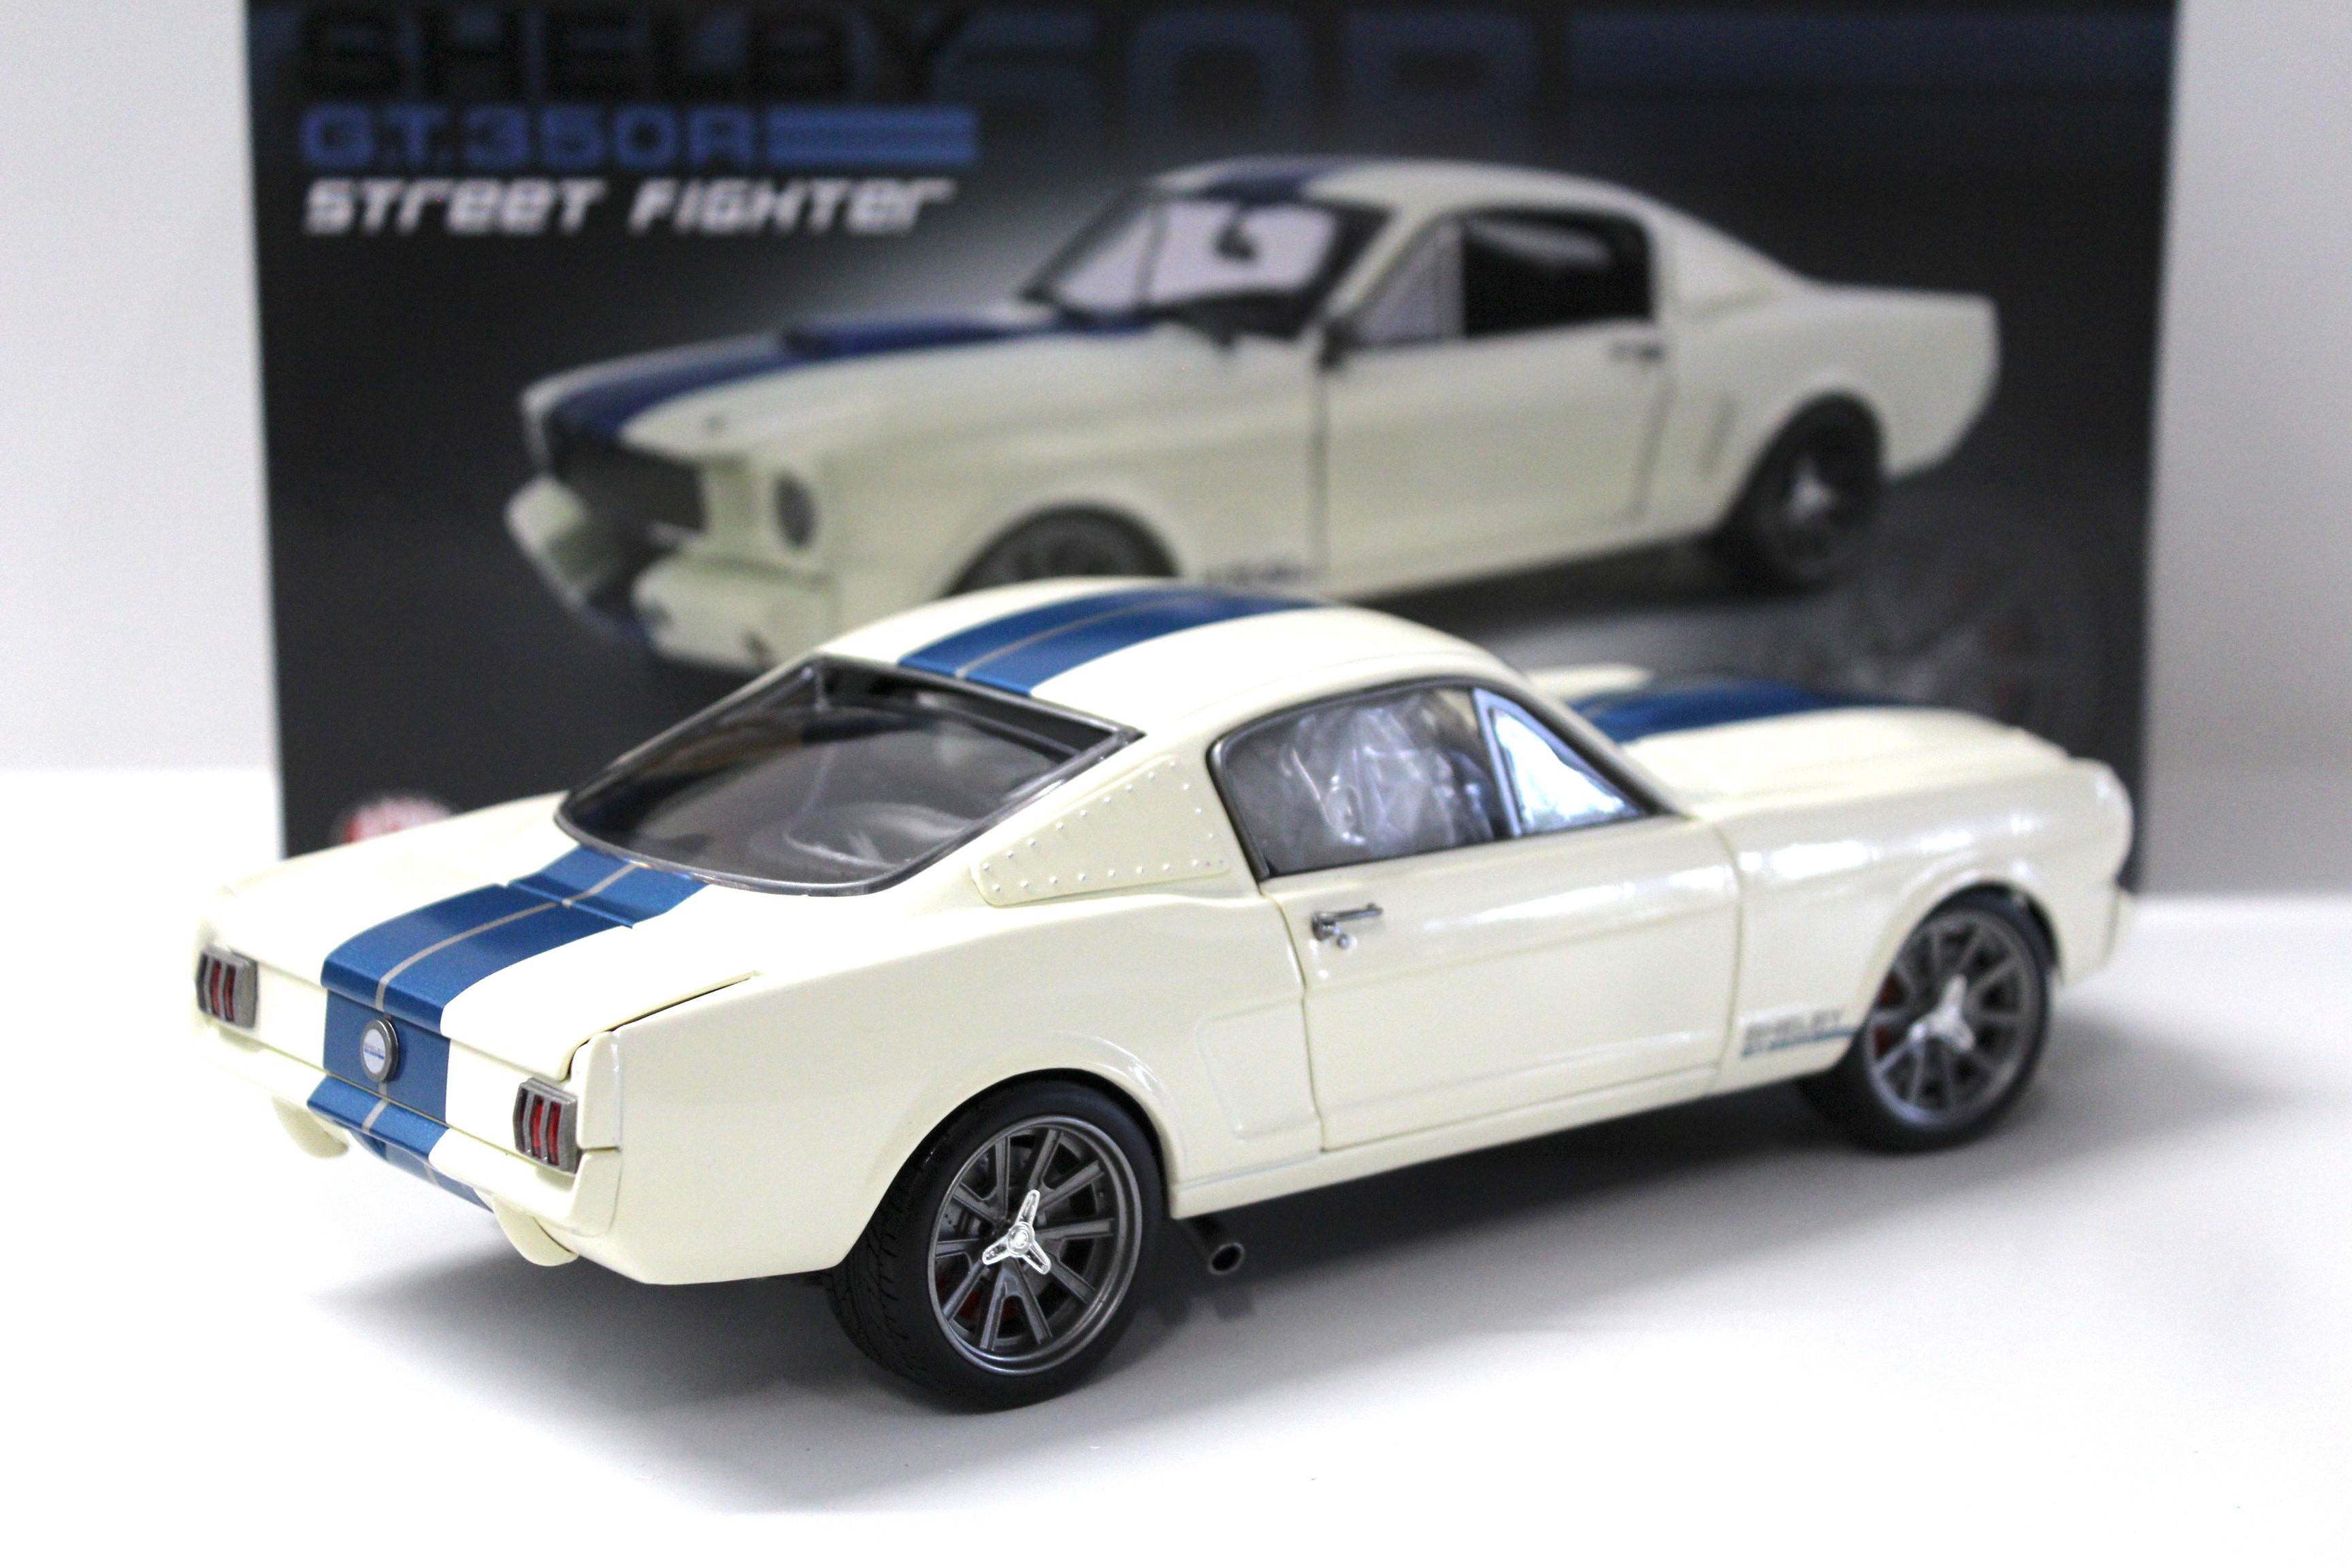 1:18 ACME 1965 Shelby GT350R Street Fighter white with blue stripes